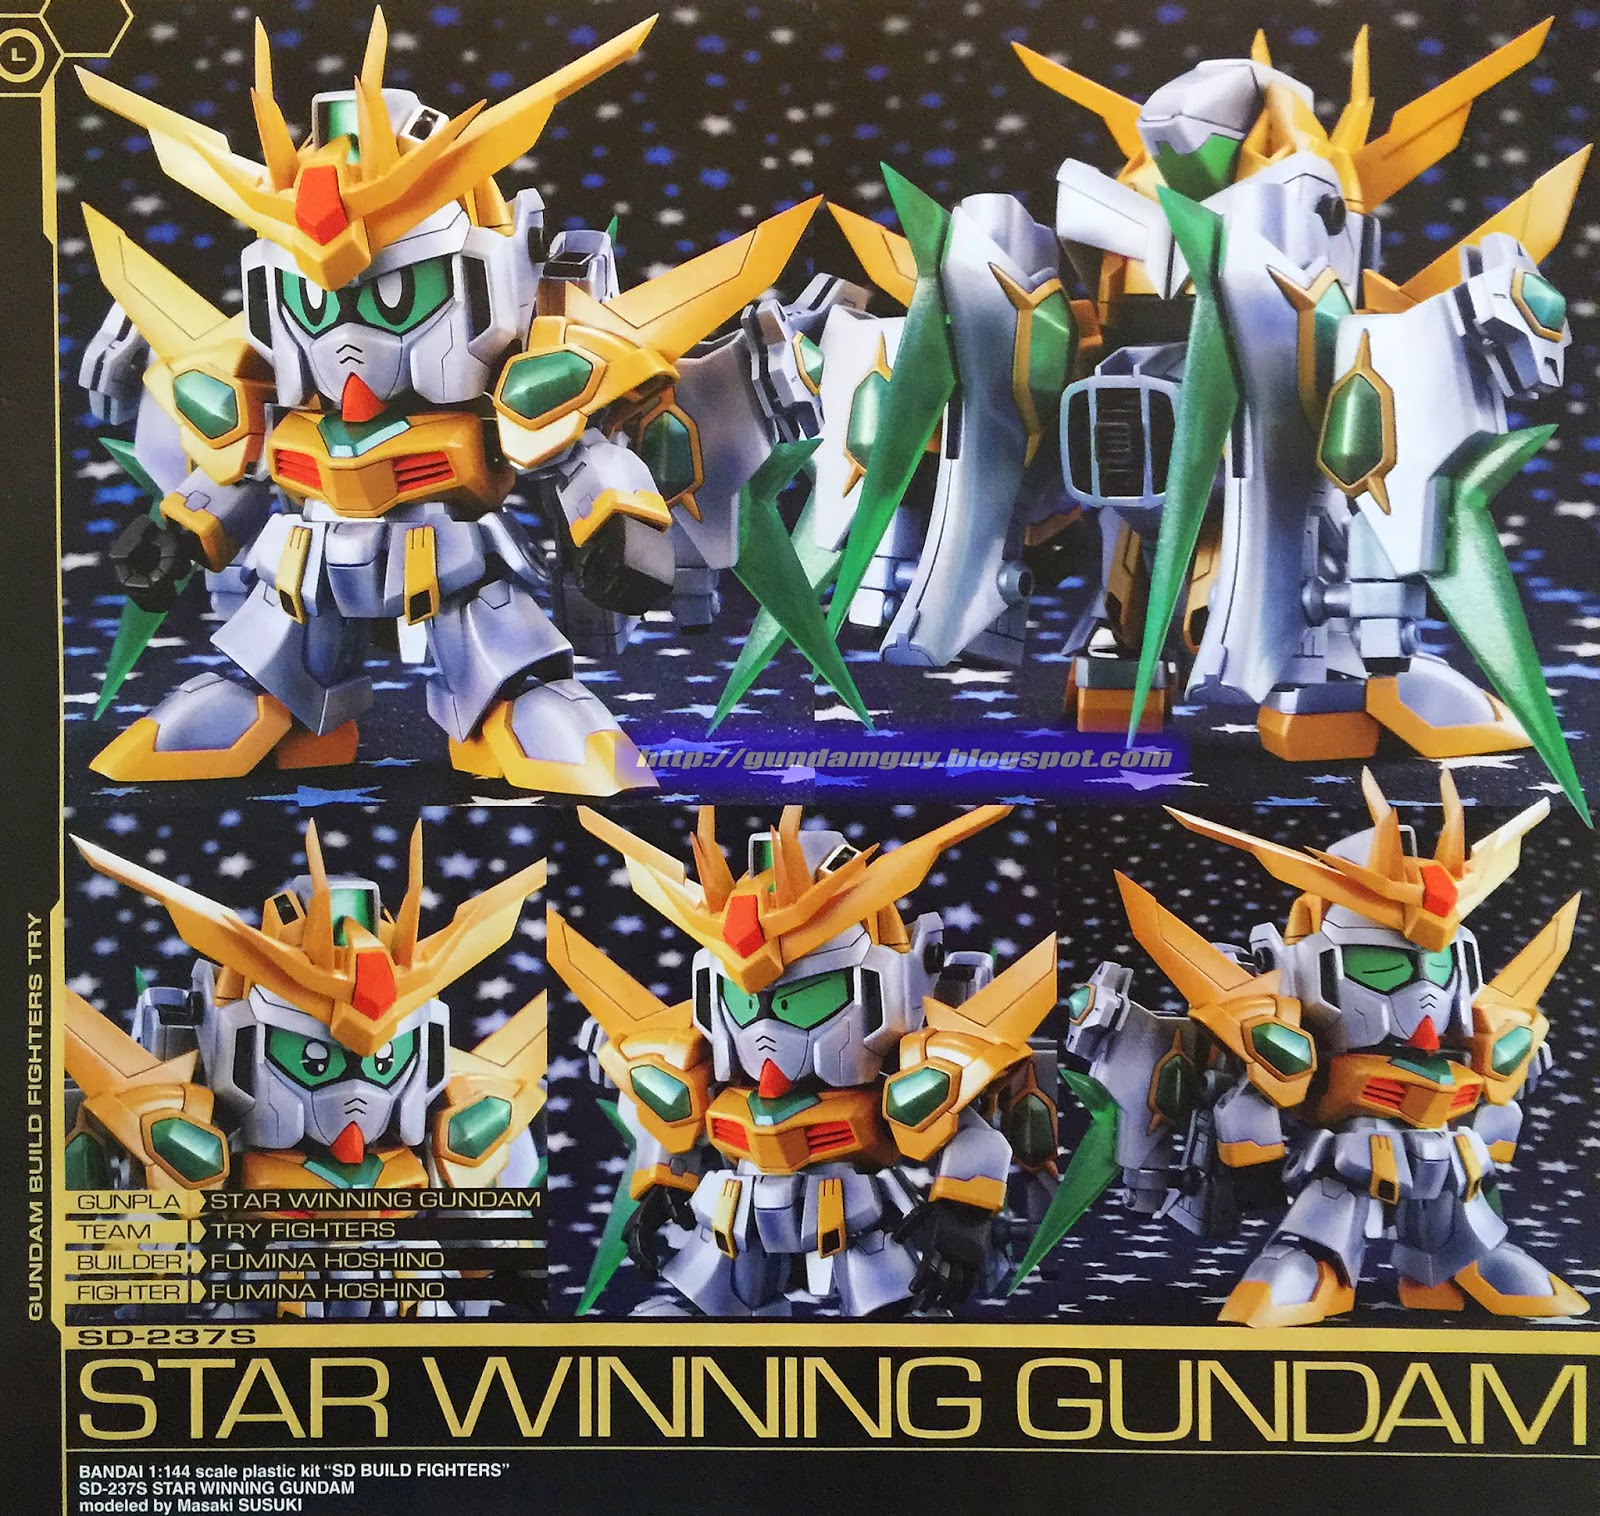 HG 1/144 Shin Burning Gundam - Release Info, Box art and Official Images